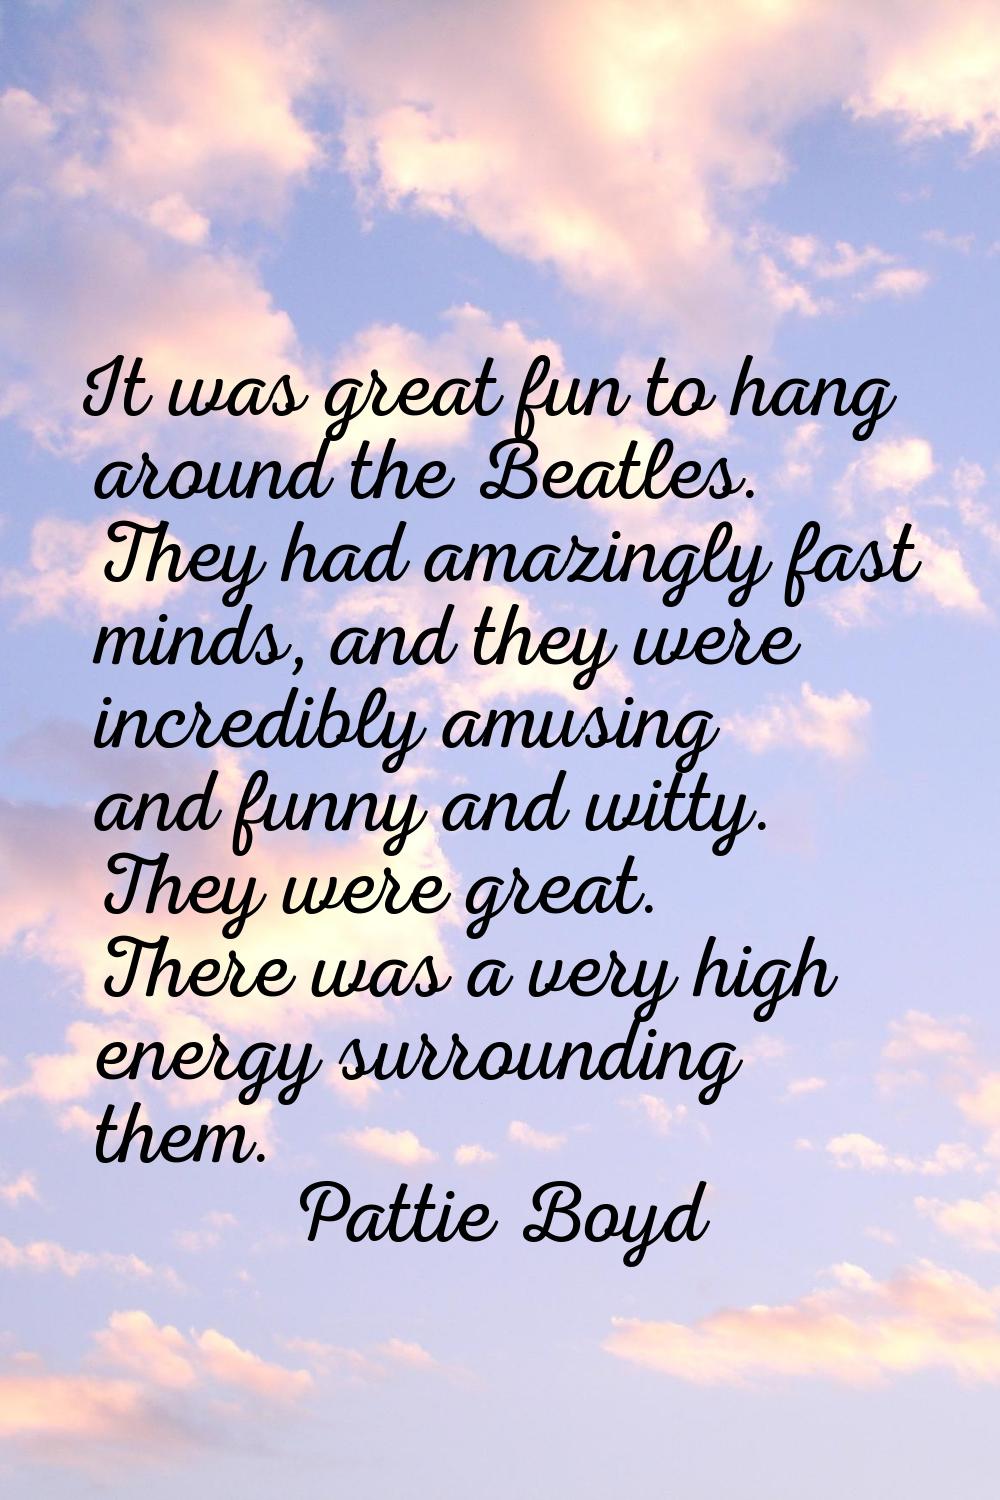 It was great fun to hang around the Beatles. They had amazingly fast minds, and they were incredibl